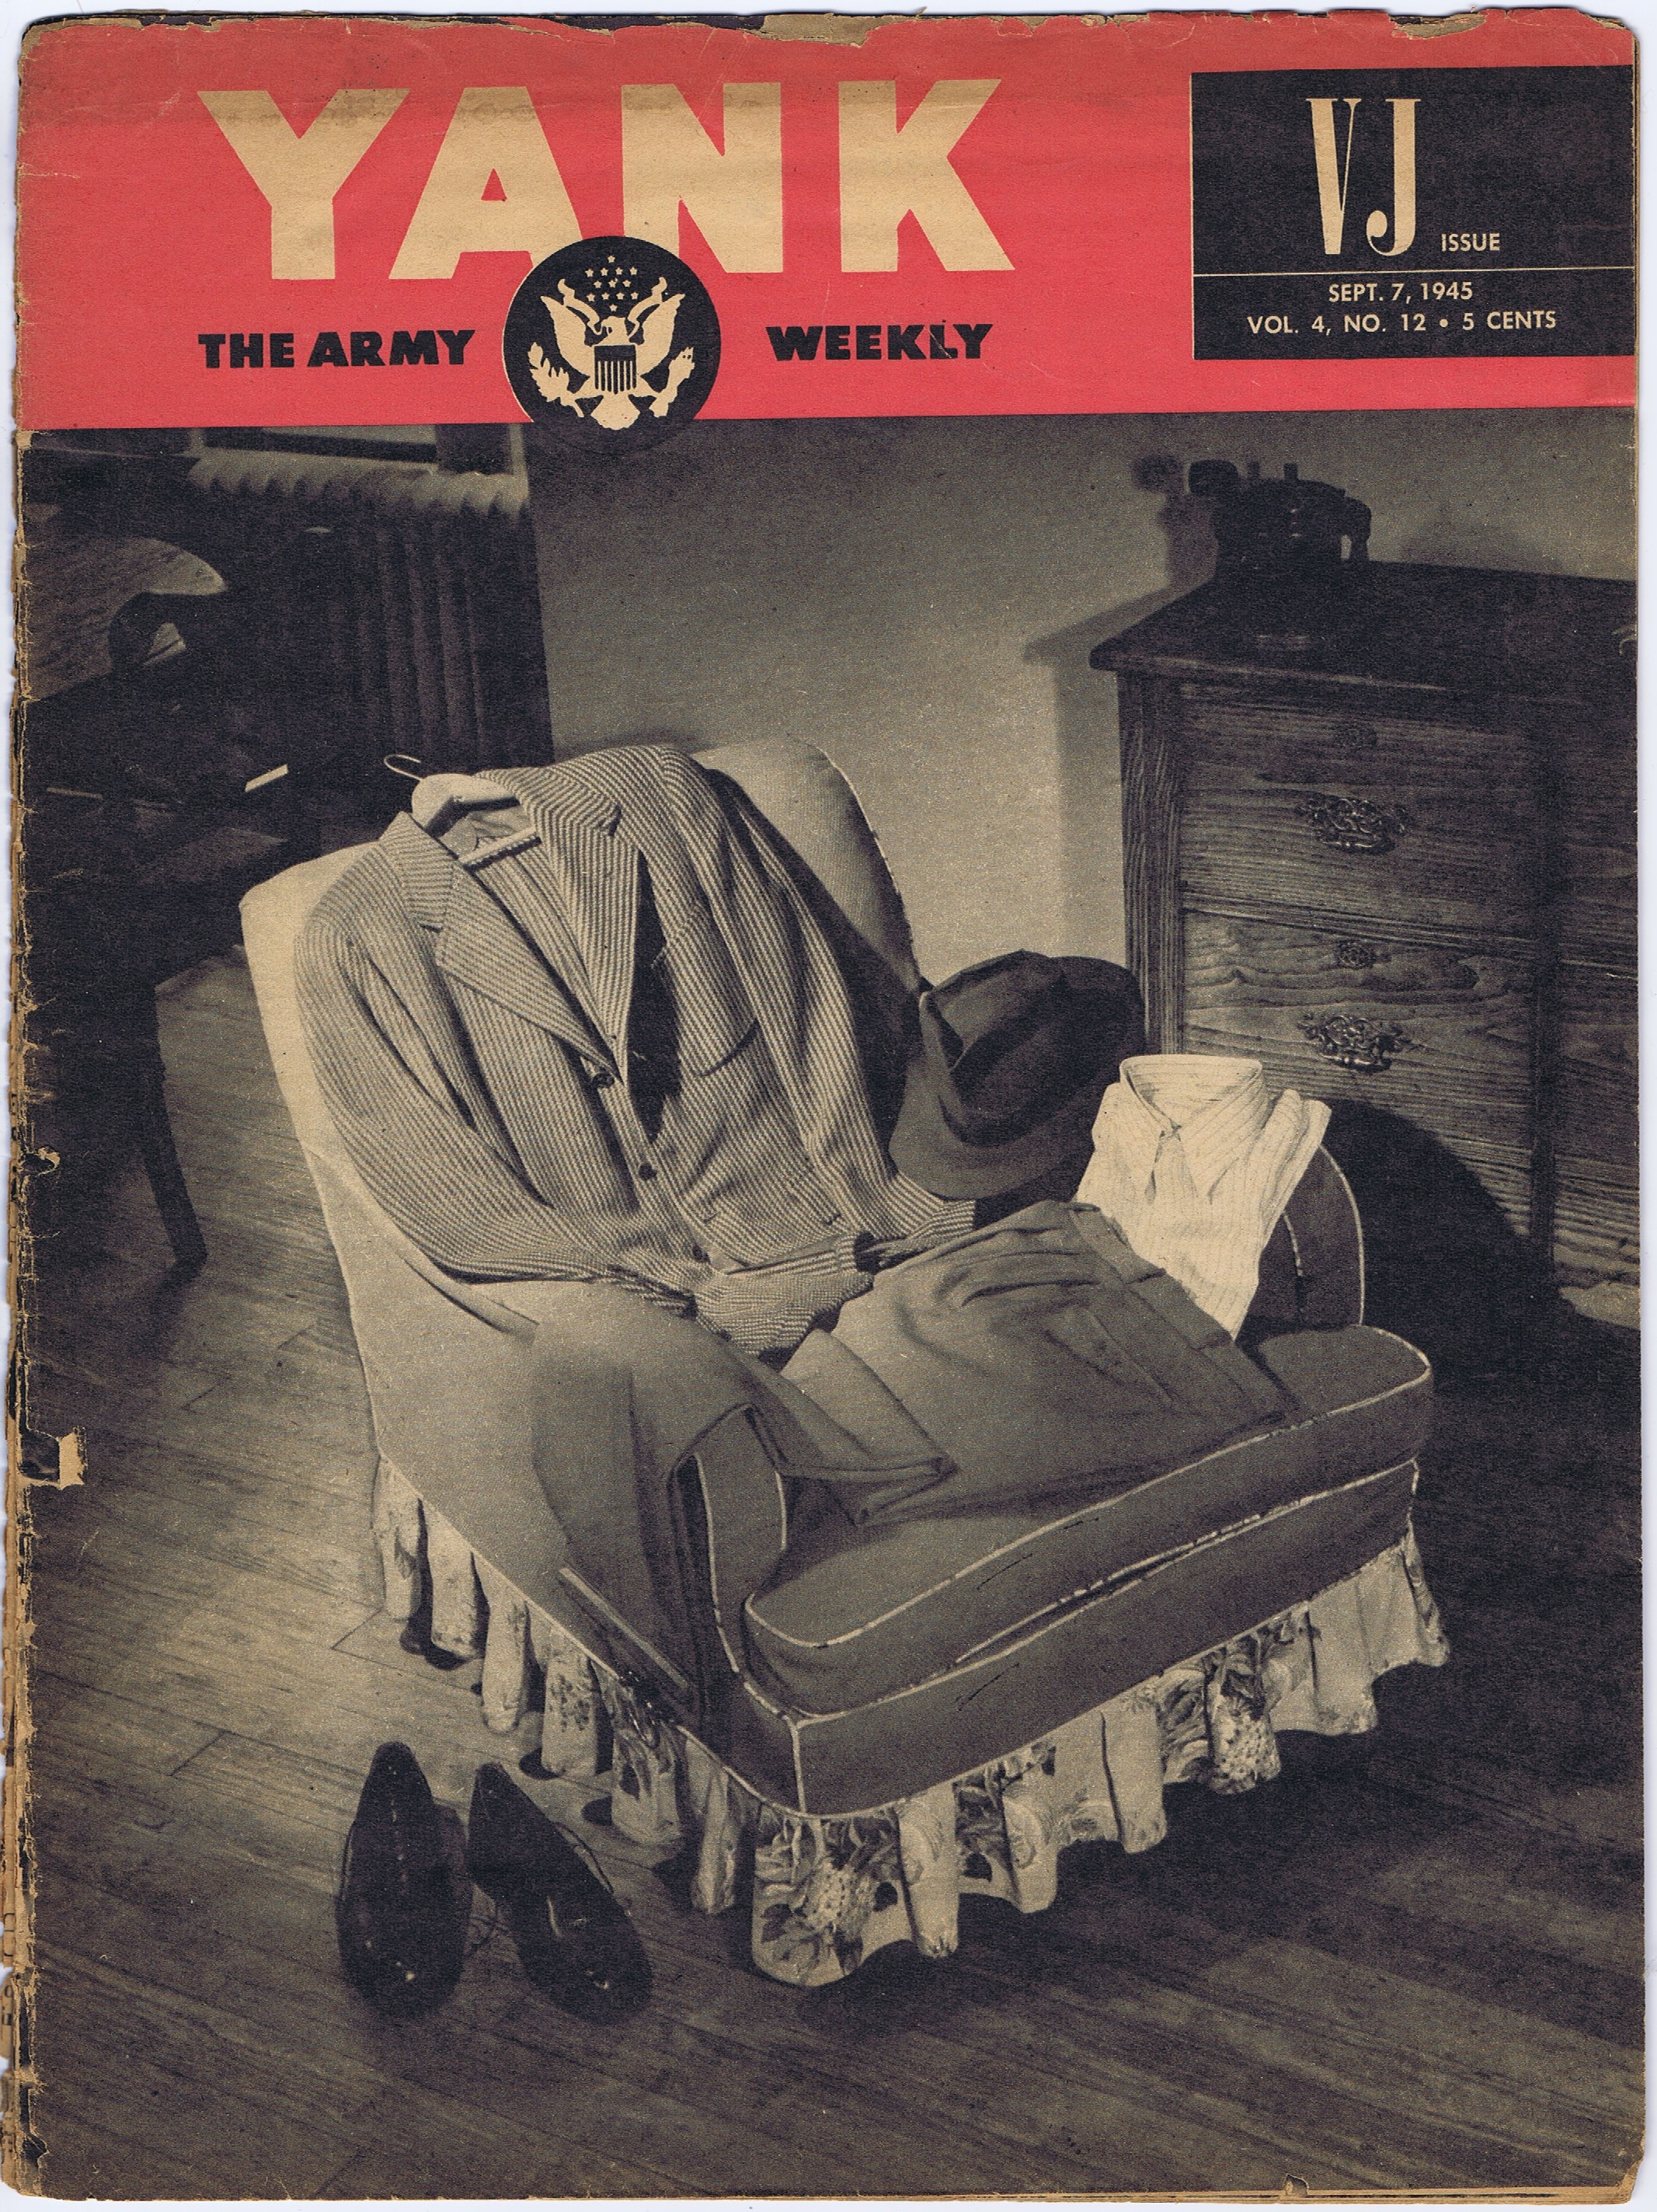 J218	YANK, THE ARMY WEEKLY VJ ISSUE SEPTEMBER 7, 1945